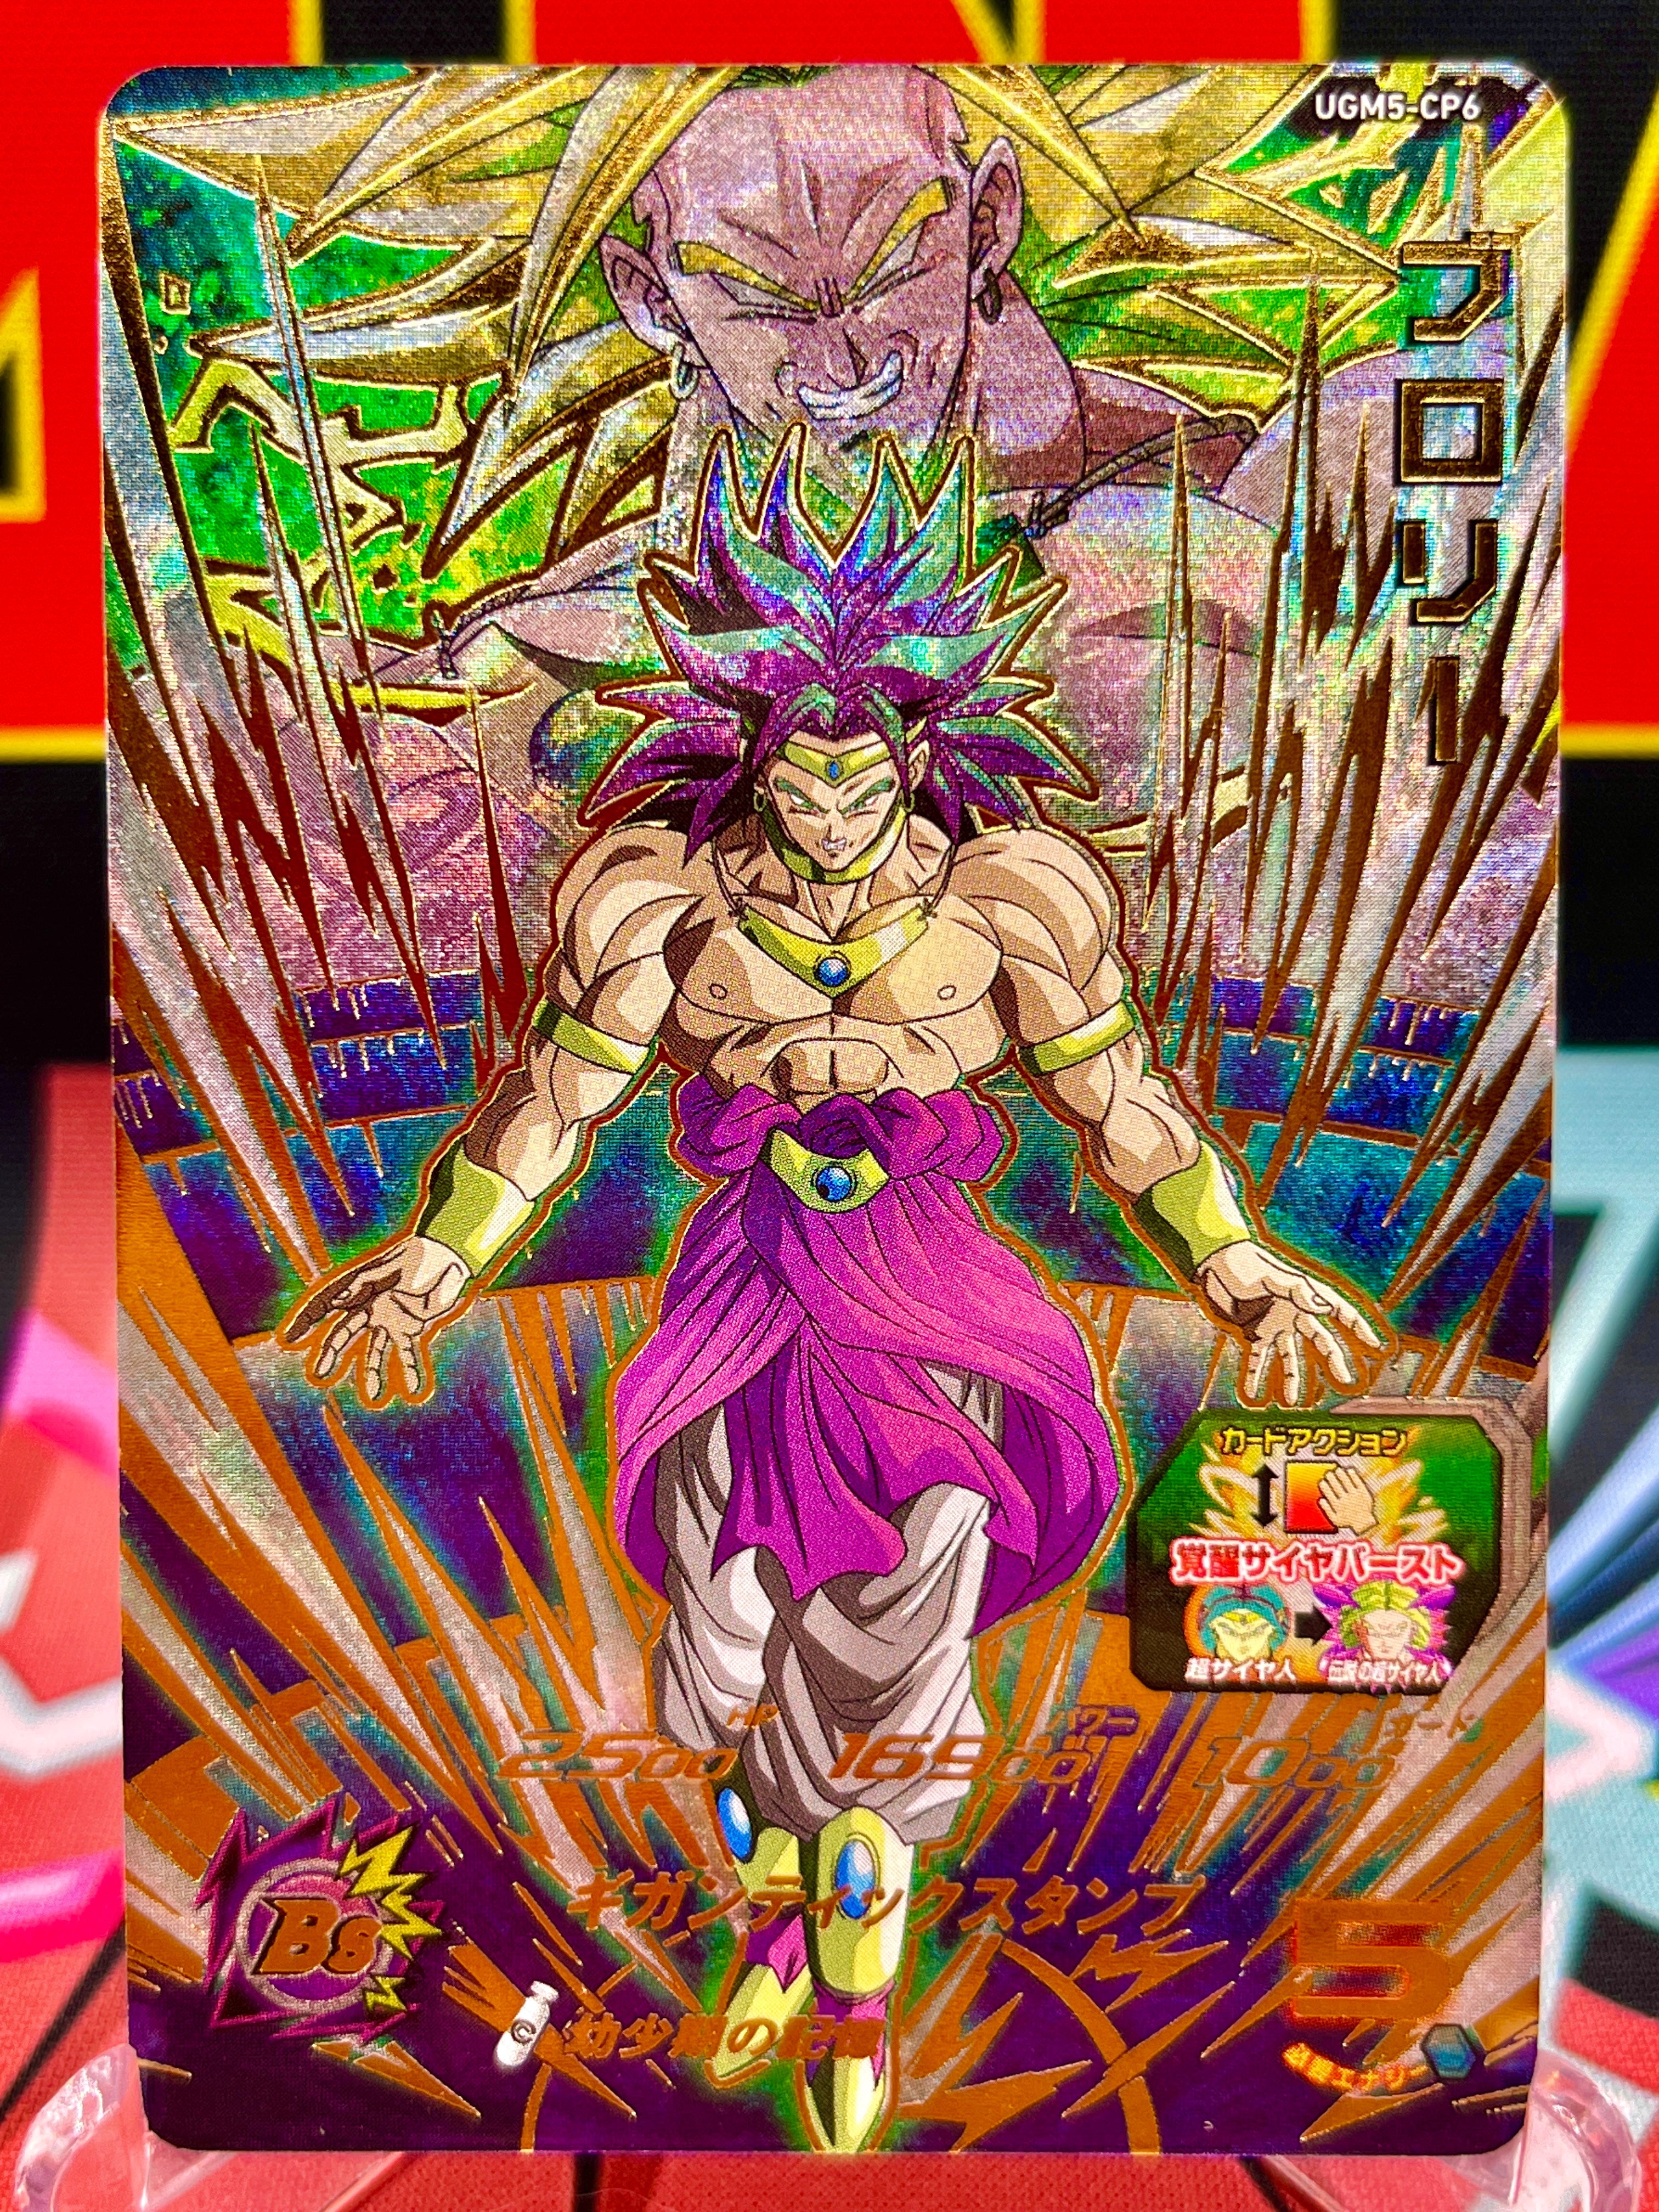 UGM5-CP6 Broly CP (2022)